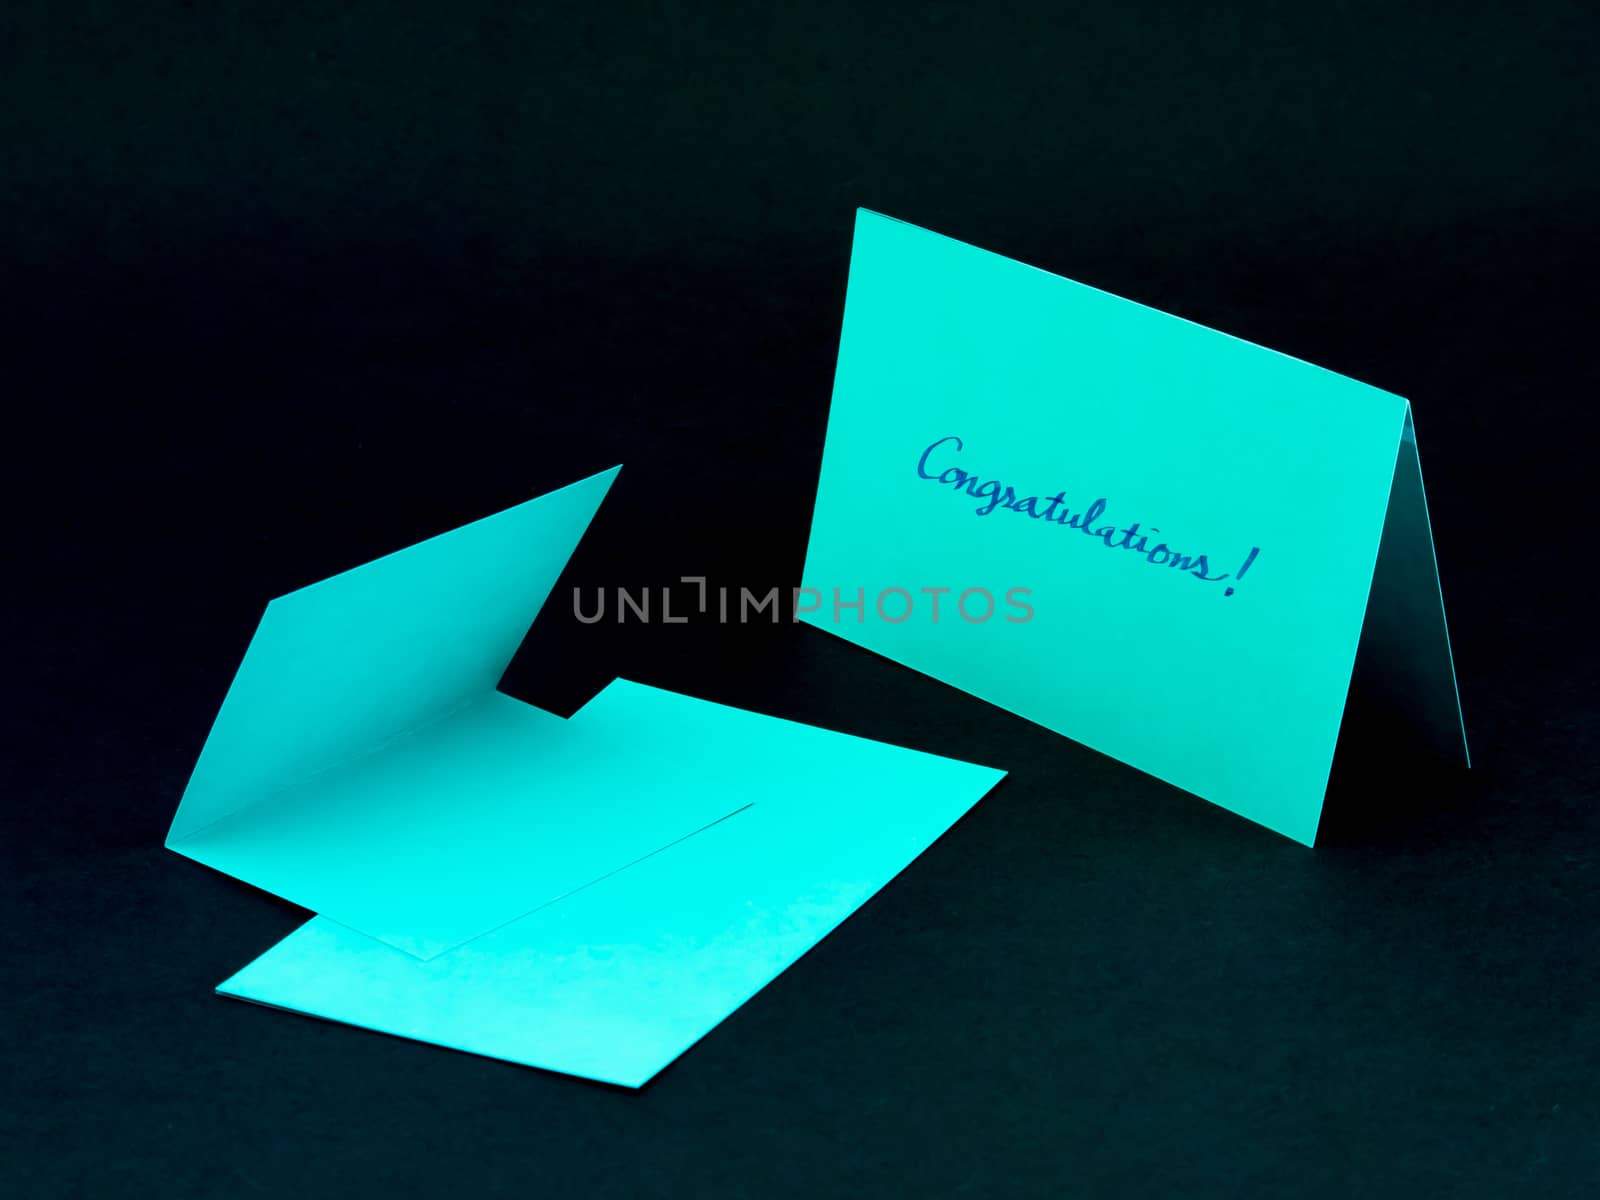 Message Card for Your Family and Friends; Congratulations!